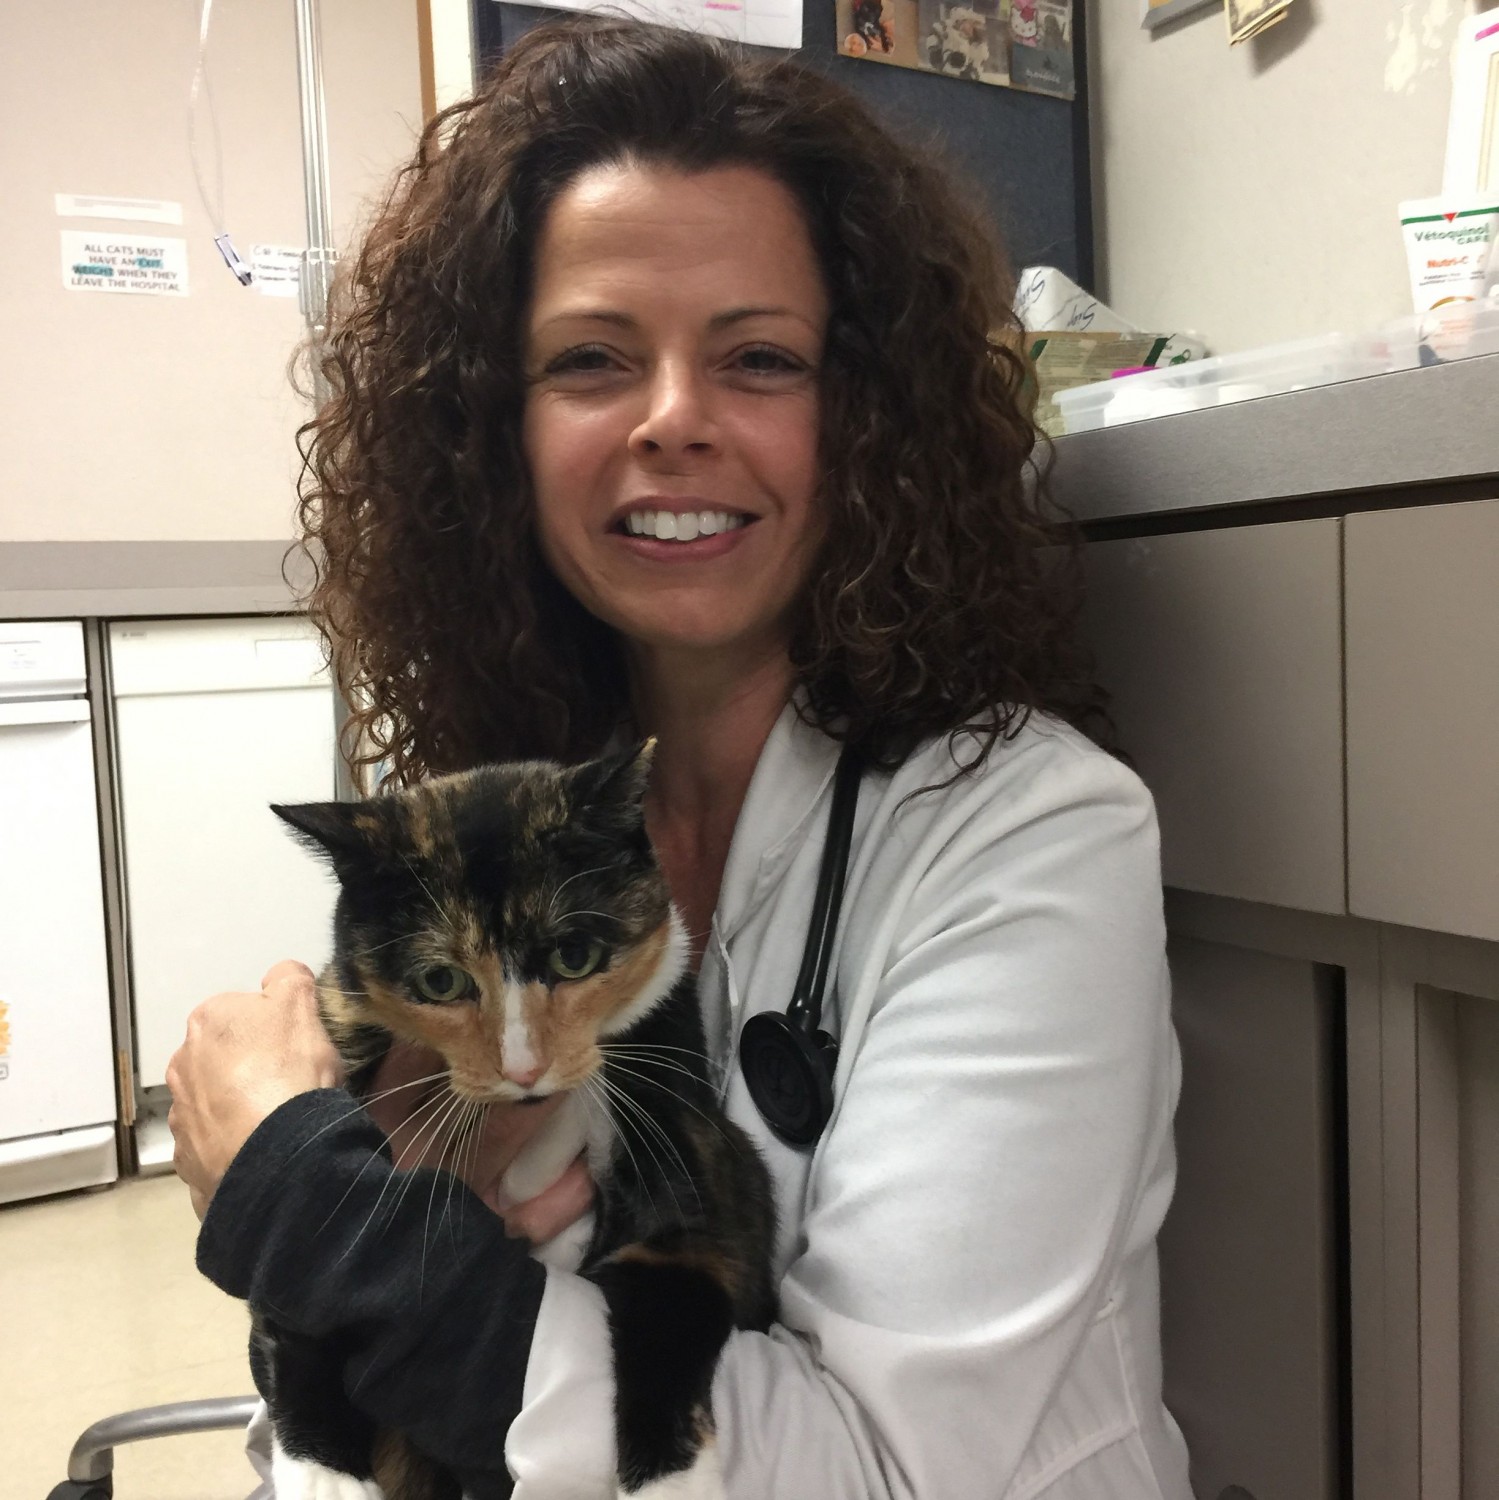 Dr. Claudine Gonzales Holding Calico Cat